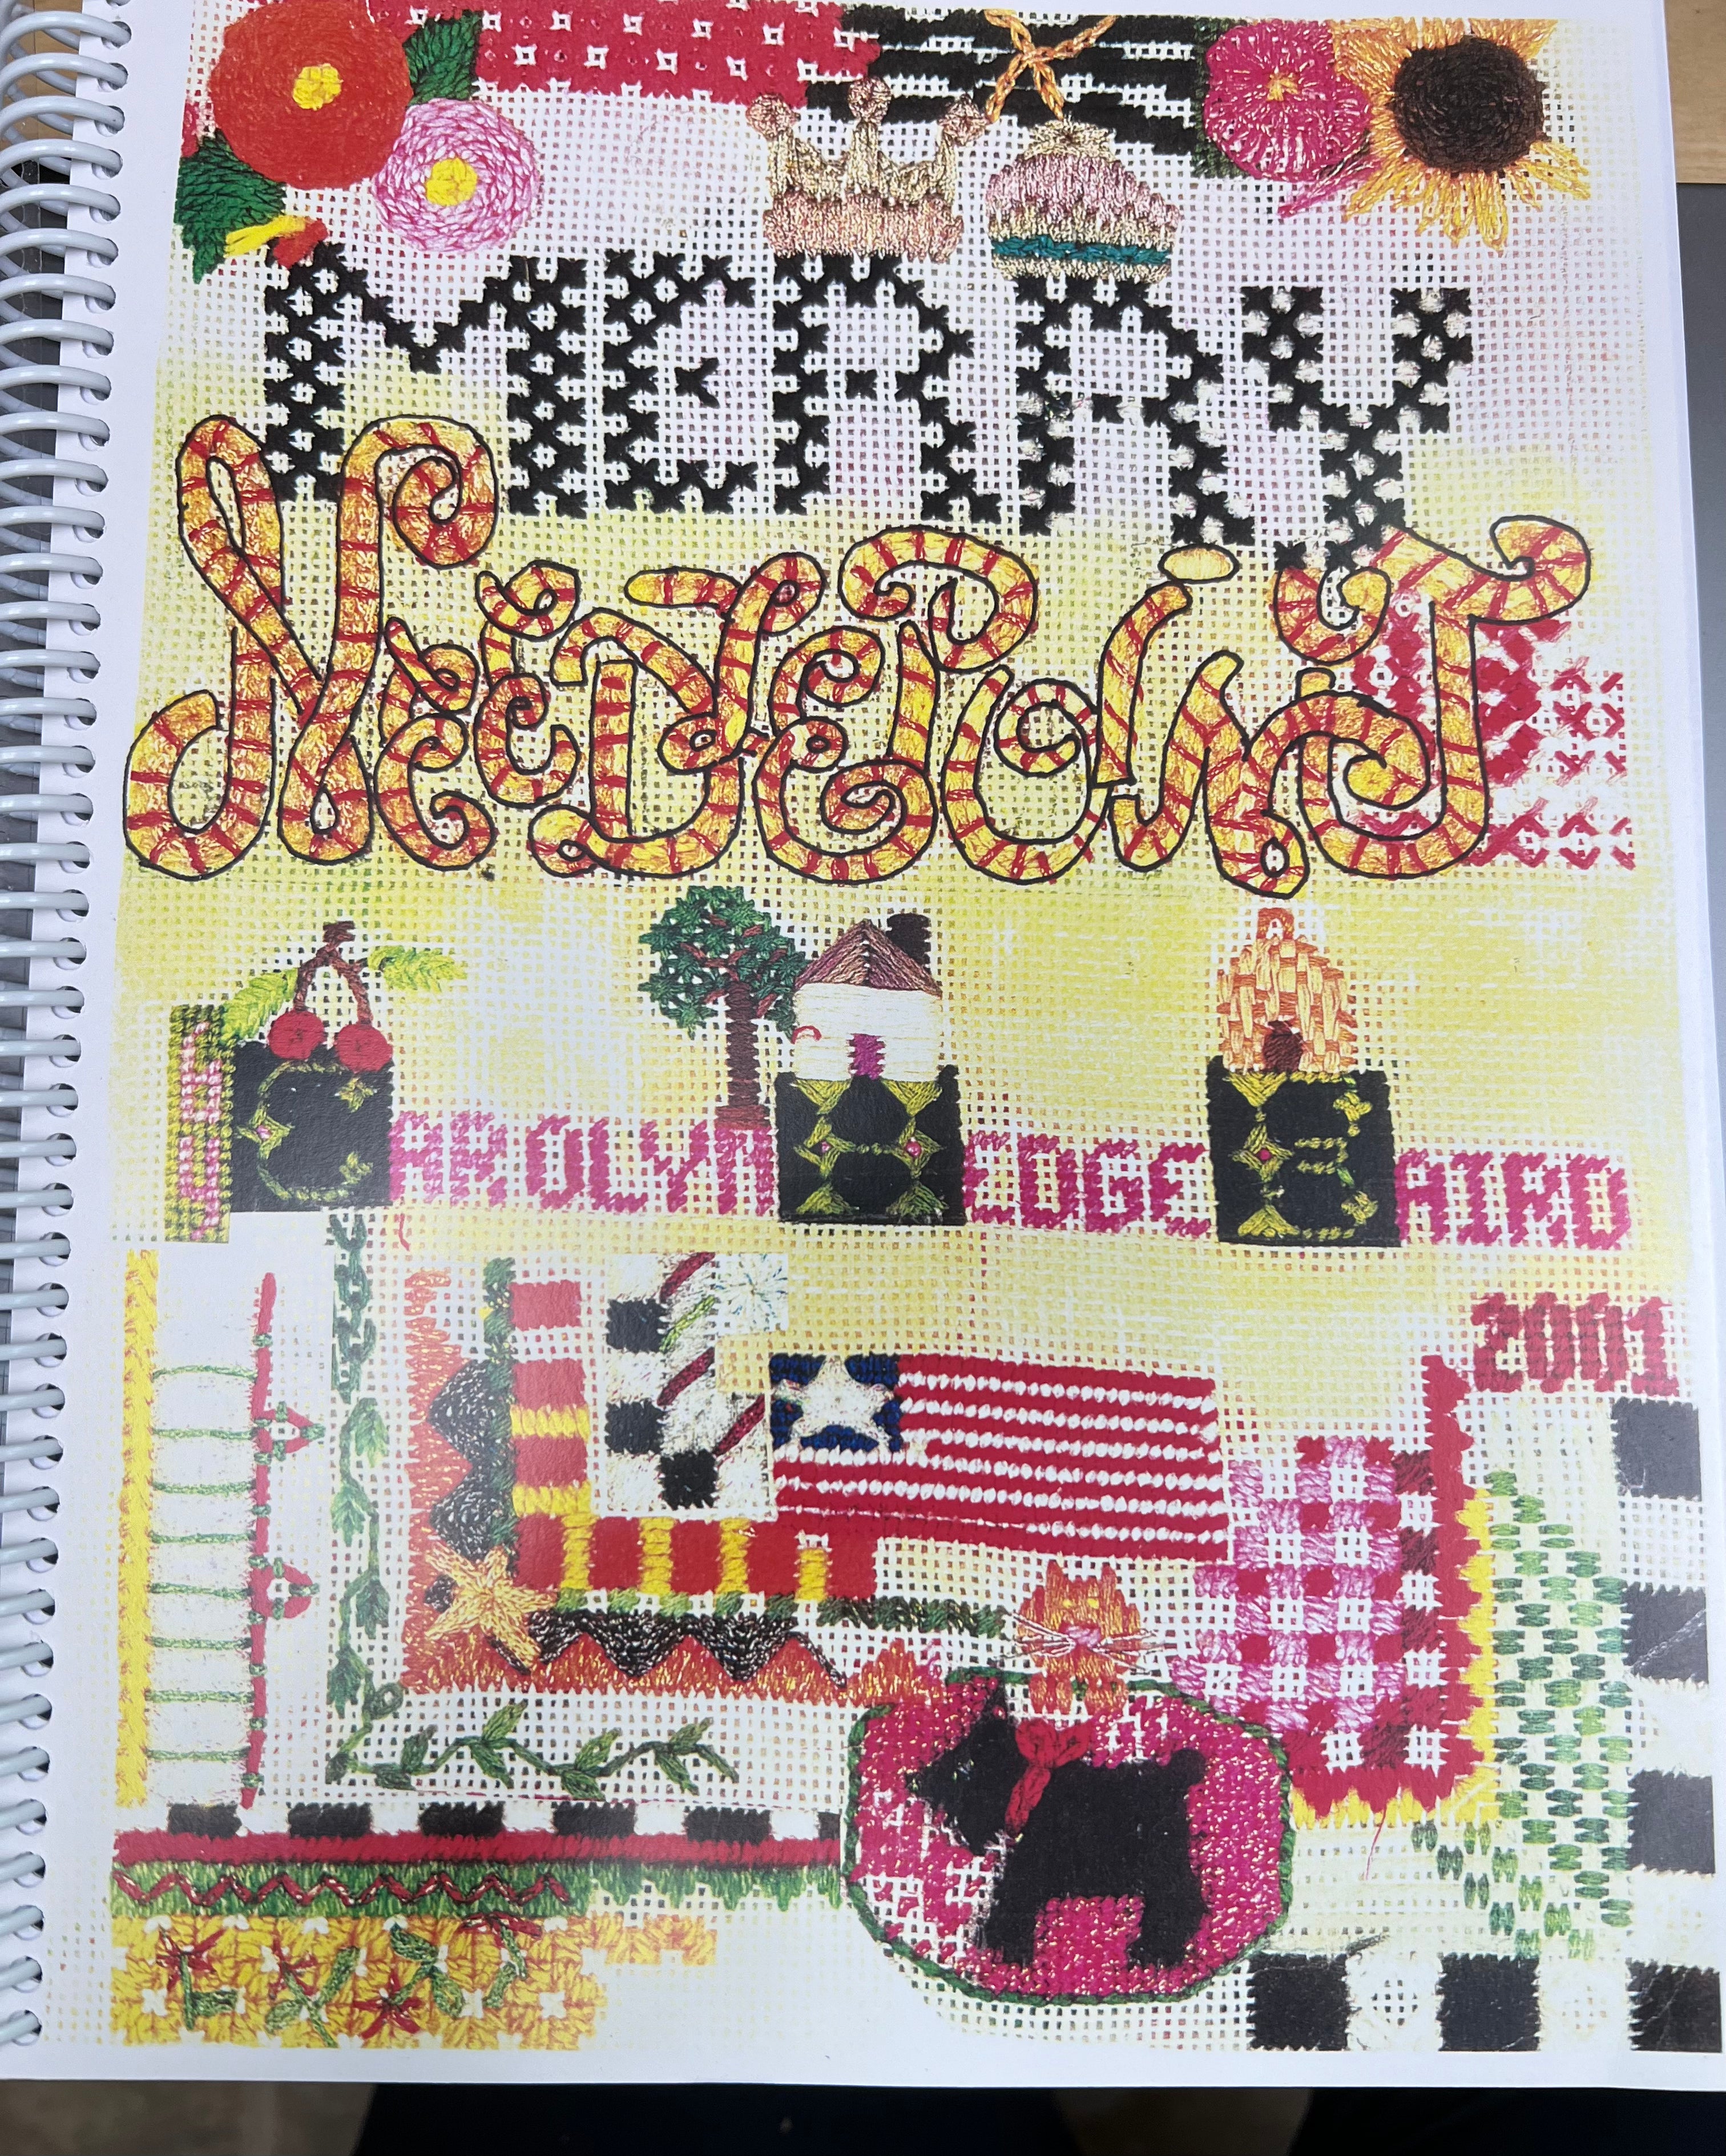 Merry Needlepoint by Carolyn Hedge Baird